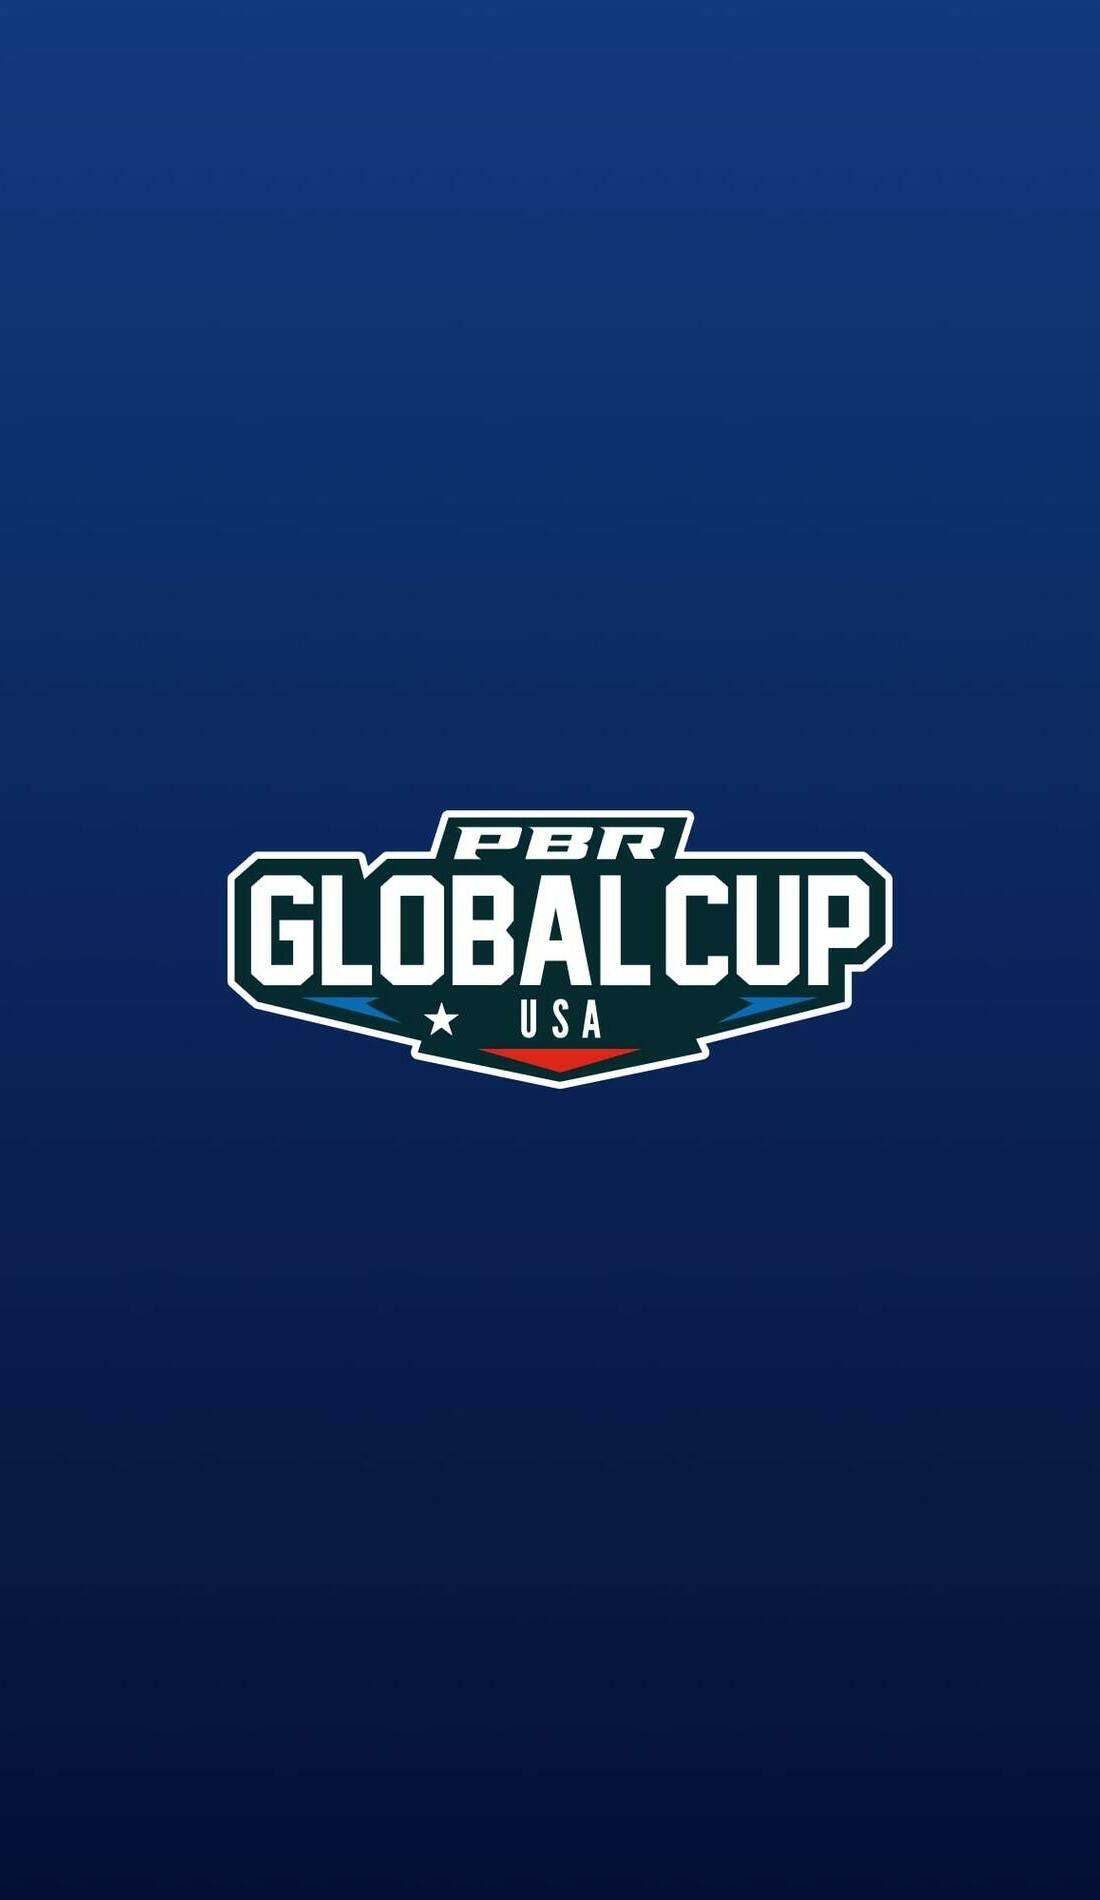 A Global Cup live event